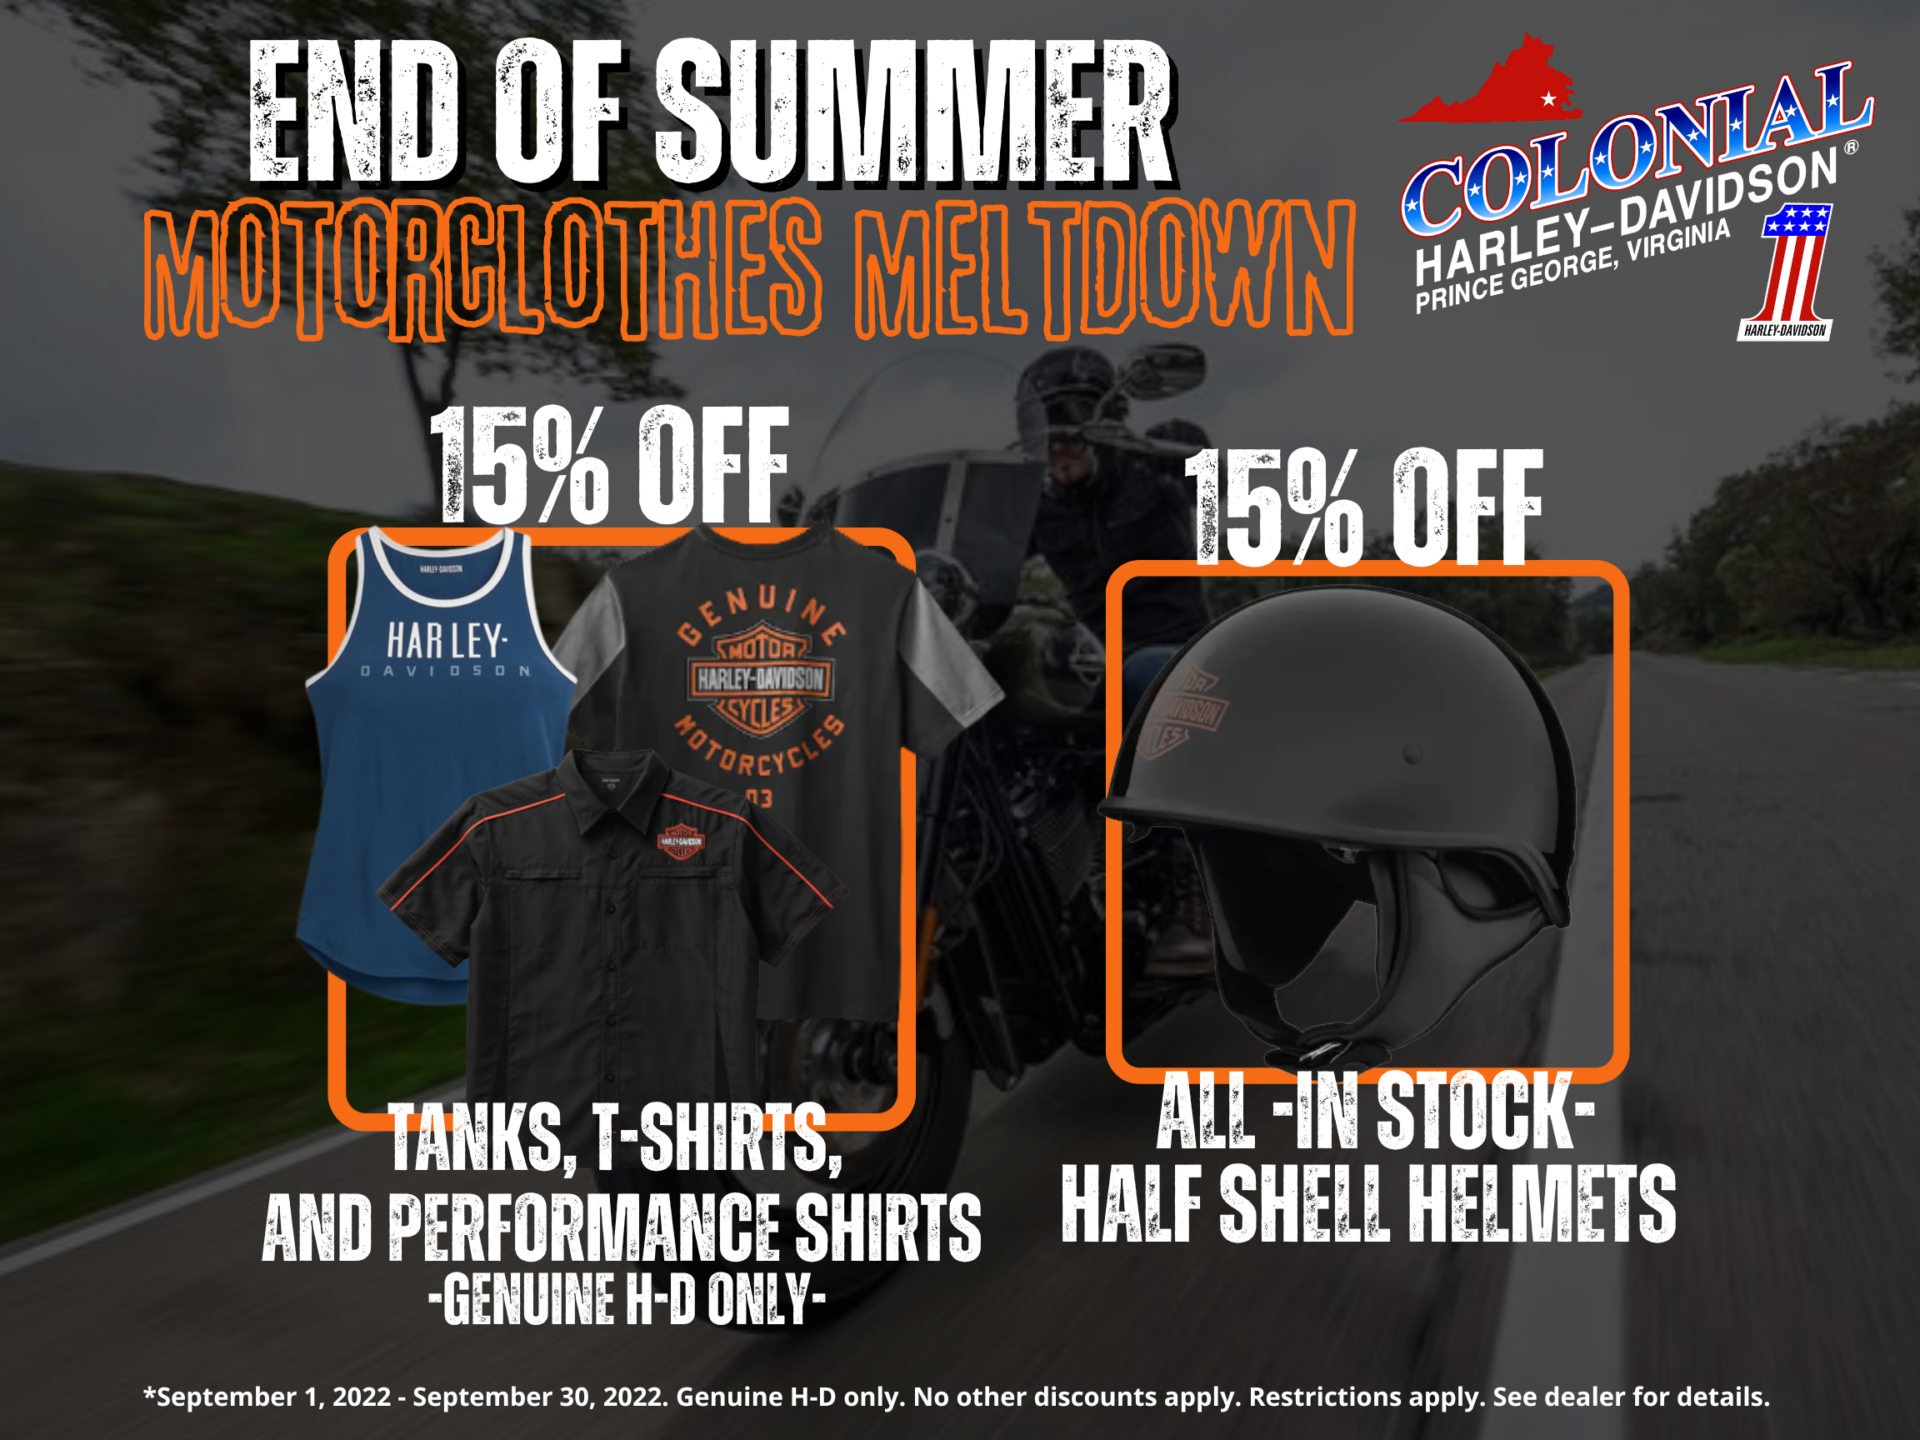 End of Summer Motorclothes Meltdown